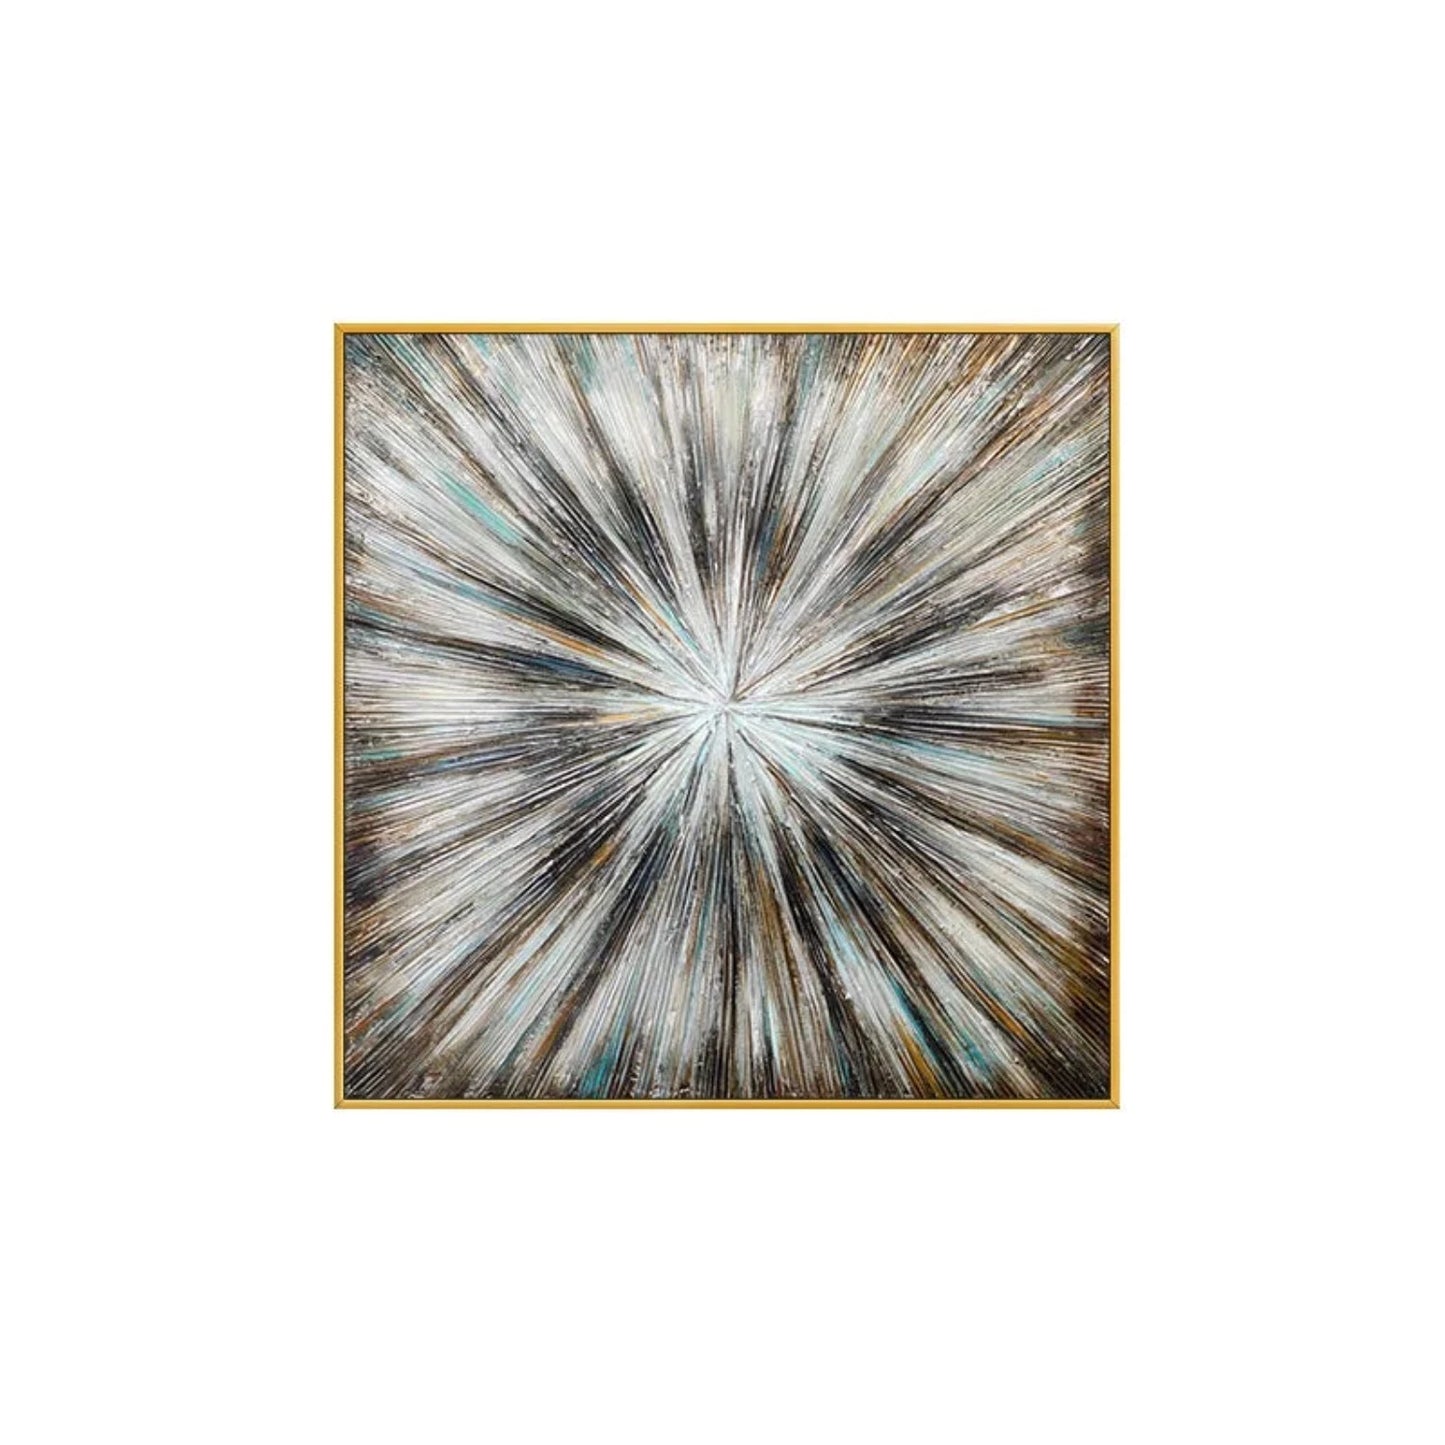 Nordic-Style Starburst Abstract Textured Painting